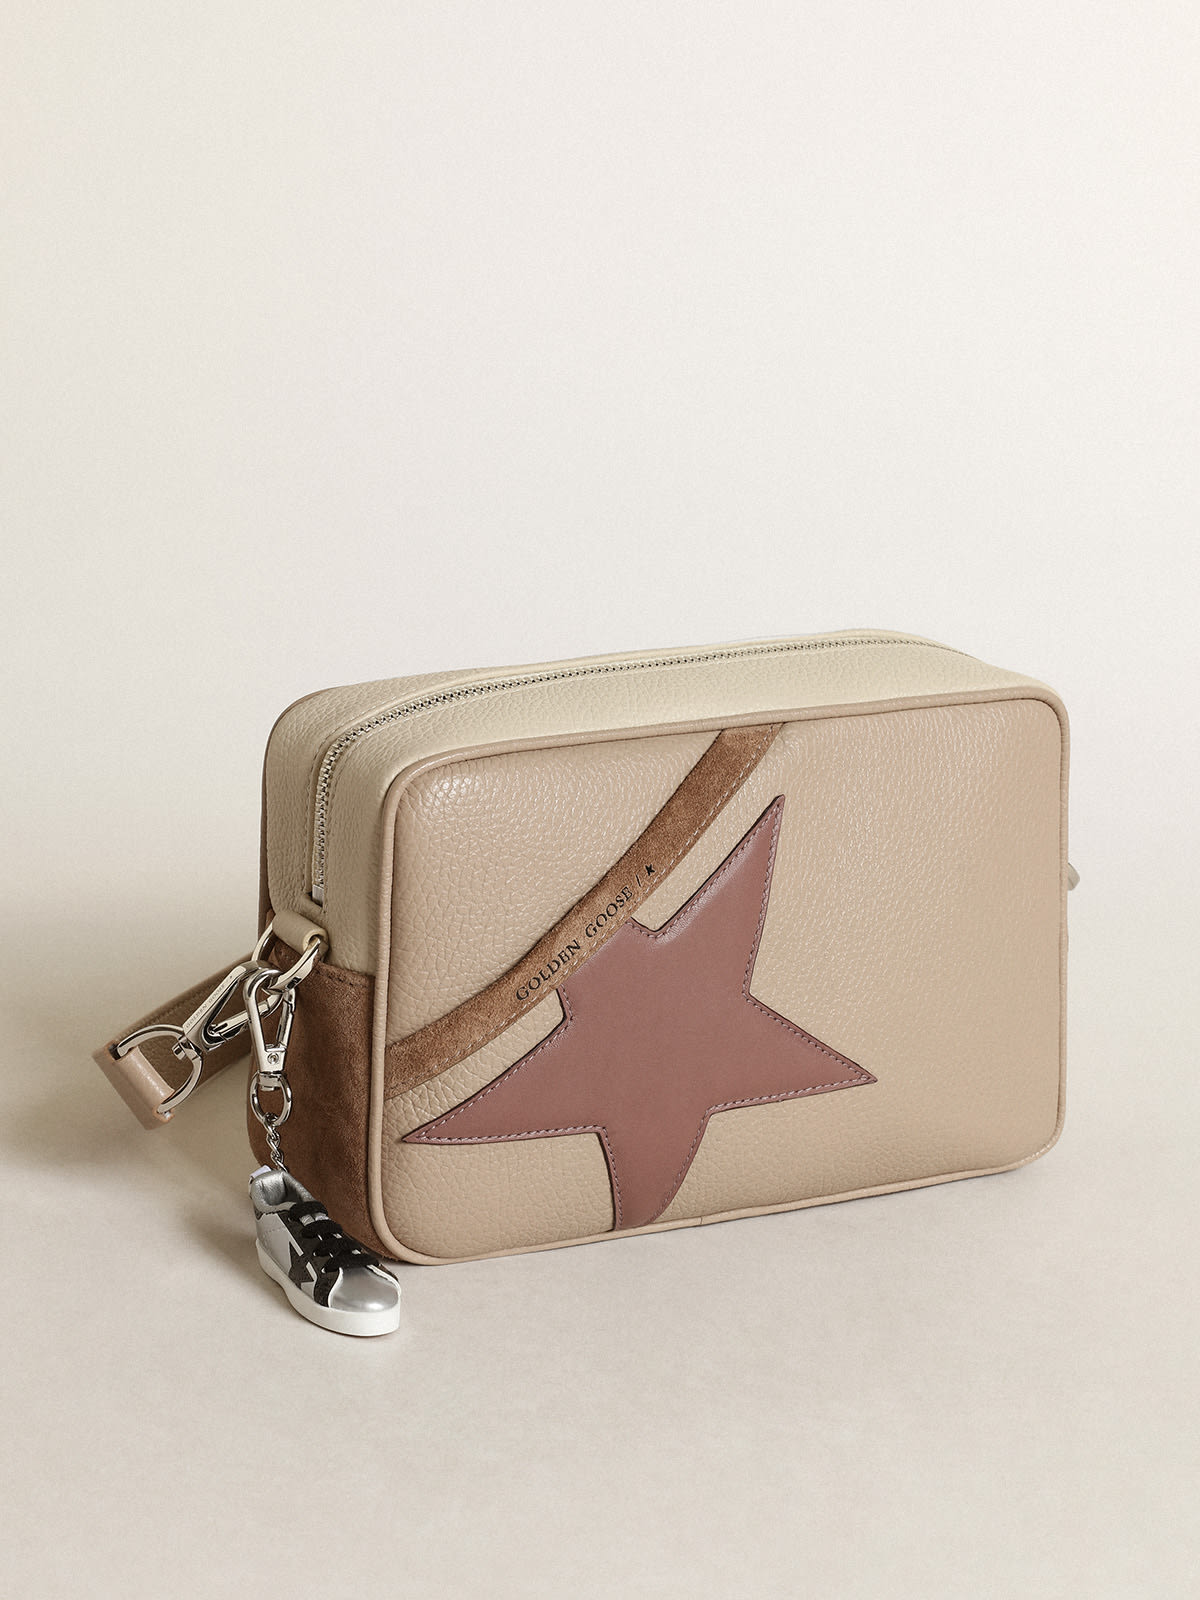 Golden Goose - Large Star Bag in off-white hammered leather and cappuccino-colored suede with purple leather star in 